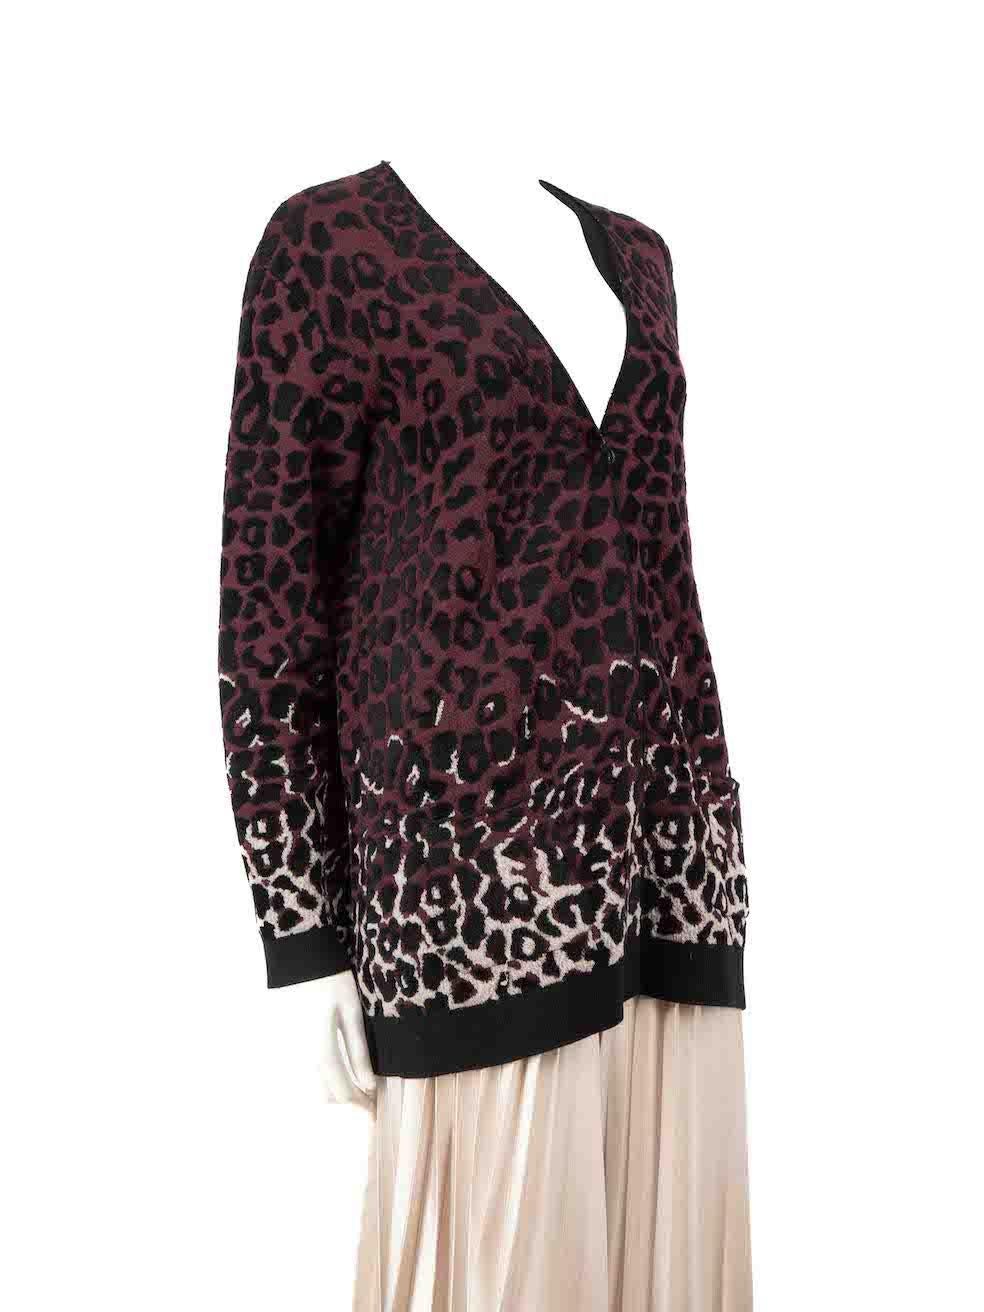 CONDITION is Very good. Hardly any visible wear to cardigan is evident on this used Lanvin designer resale item.
 
 
 
 Details
 
 
 Purple
 
 Wool
 
 Knit cardigan
 
 Leopard print
 
 Long sleeves
 
 Snap button fastening
 
 V-neck
 
 2x Front